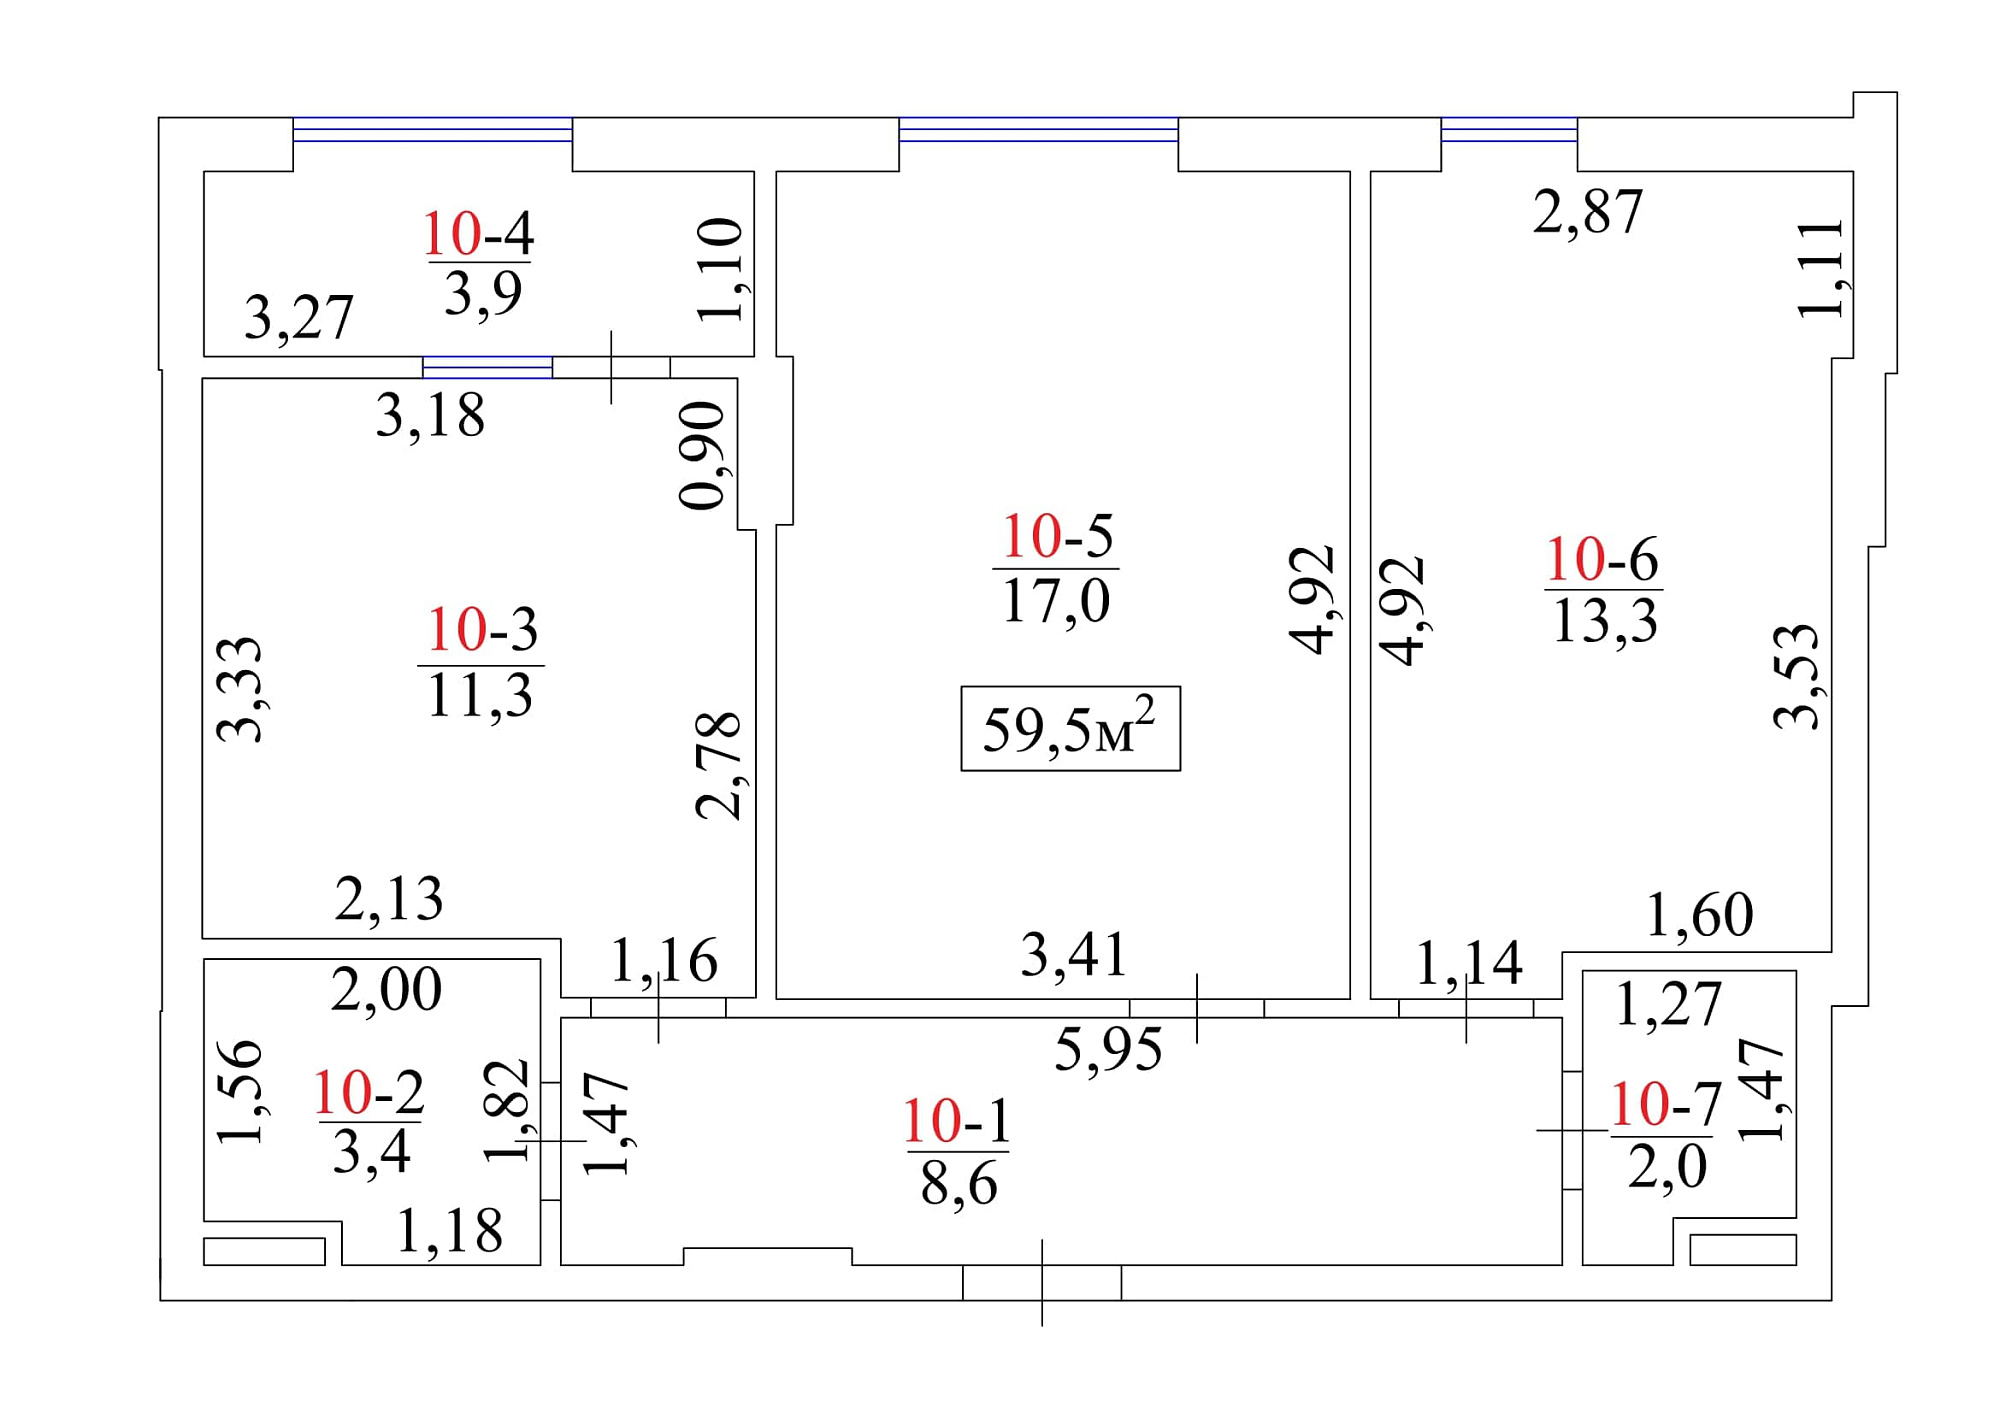 Planning 2-rm flats area 59.5m2, AB-01-02/00012.